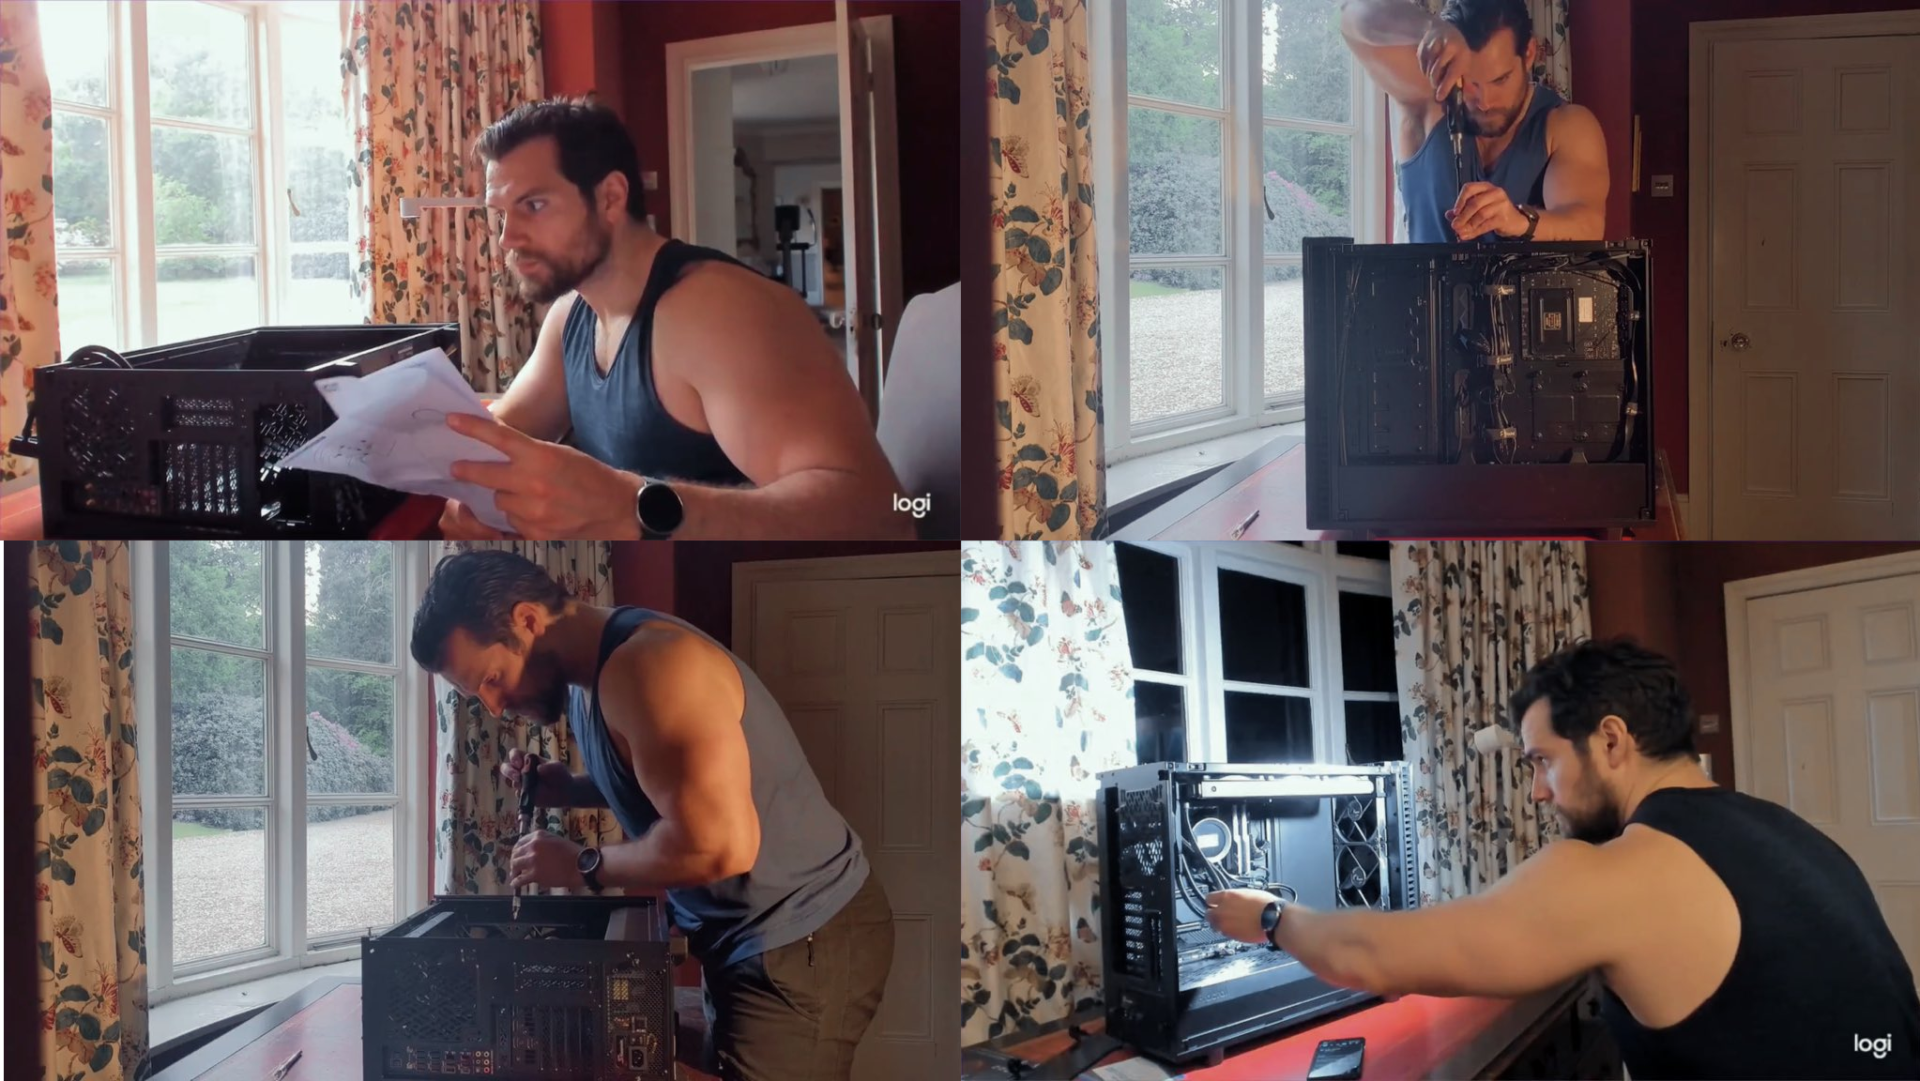 Watch Superman Henry Cavill Seductively Build a Gaming PC in a